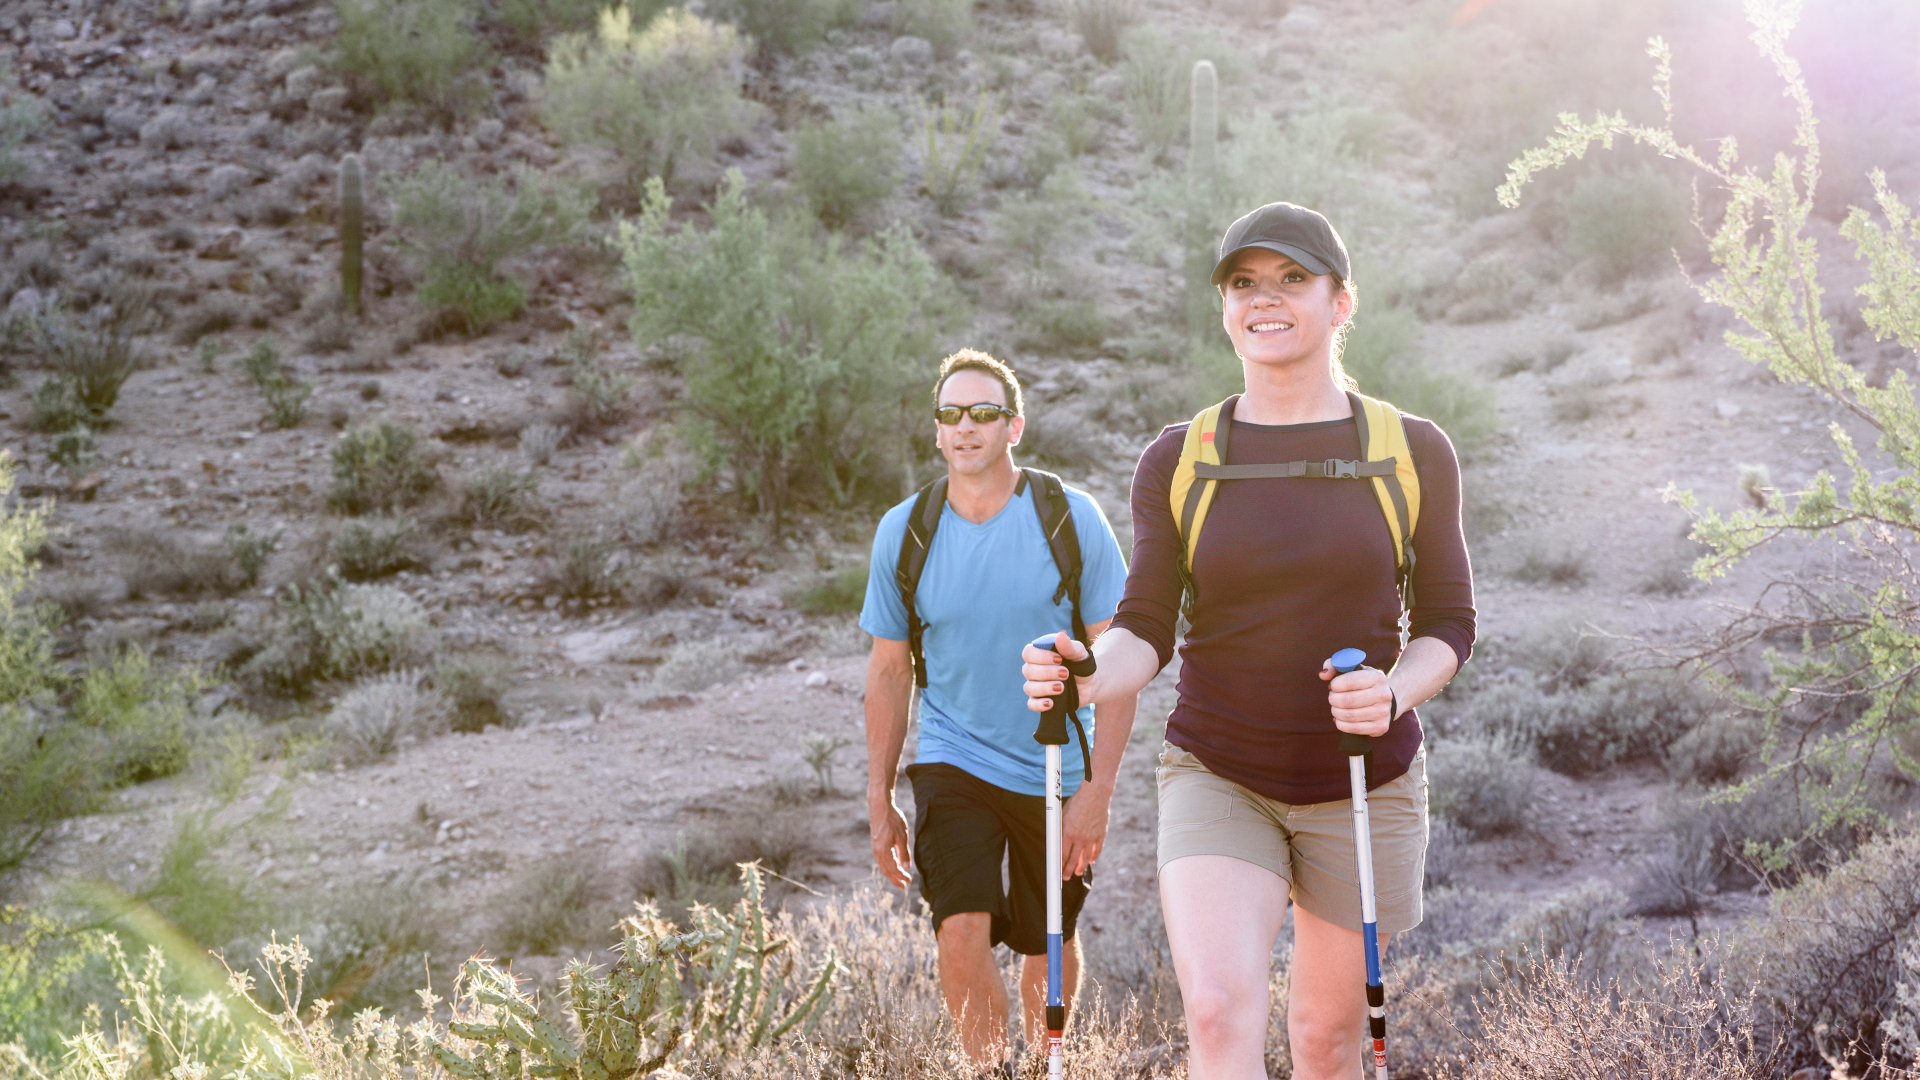 Top 15 Tips for Summer Hiking in High Temperatures